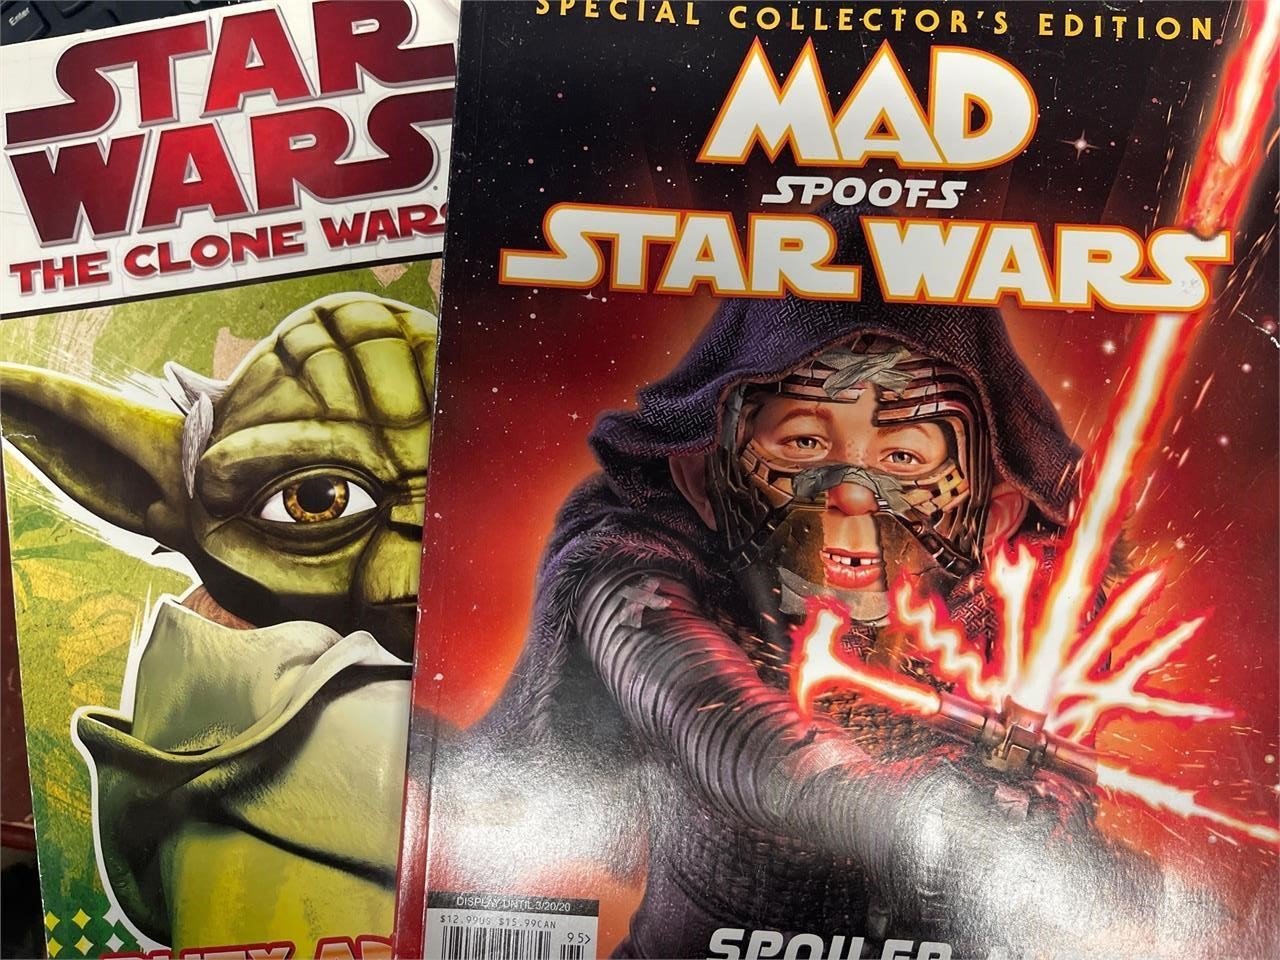 STAR WARS MAD MAG SPOOFS & CLONE BOOK